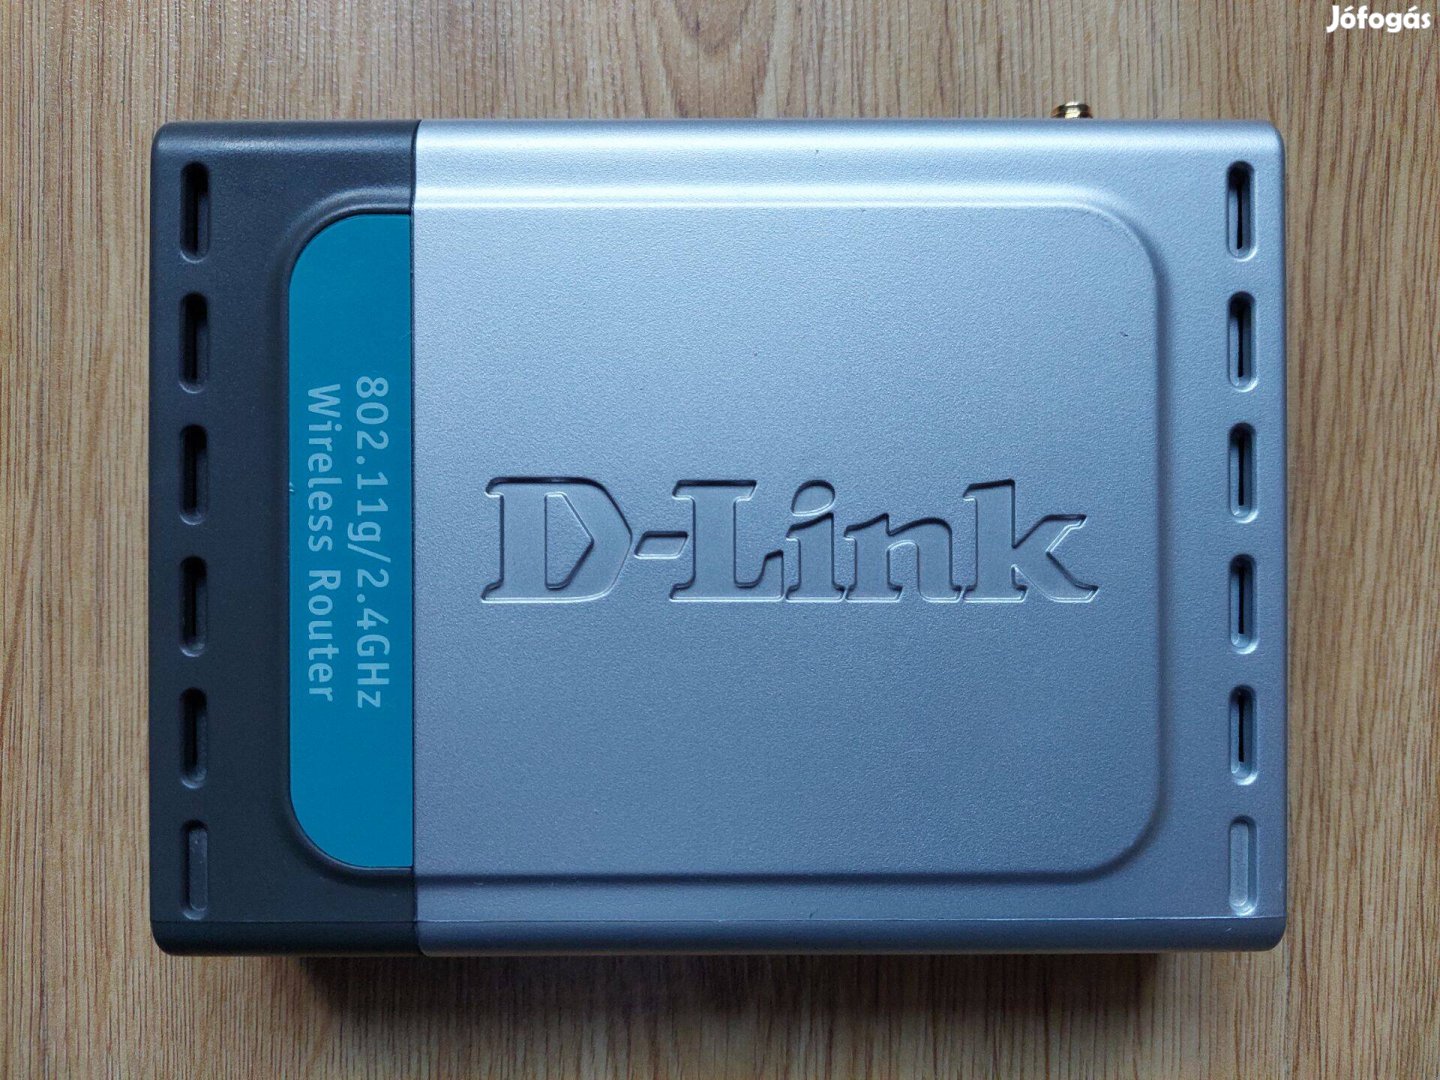 D-Link DI-524UP 54Mbps WLAN Router